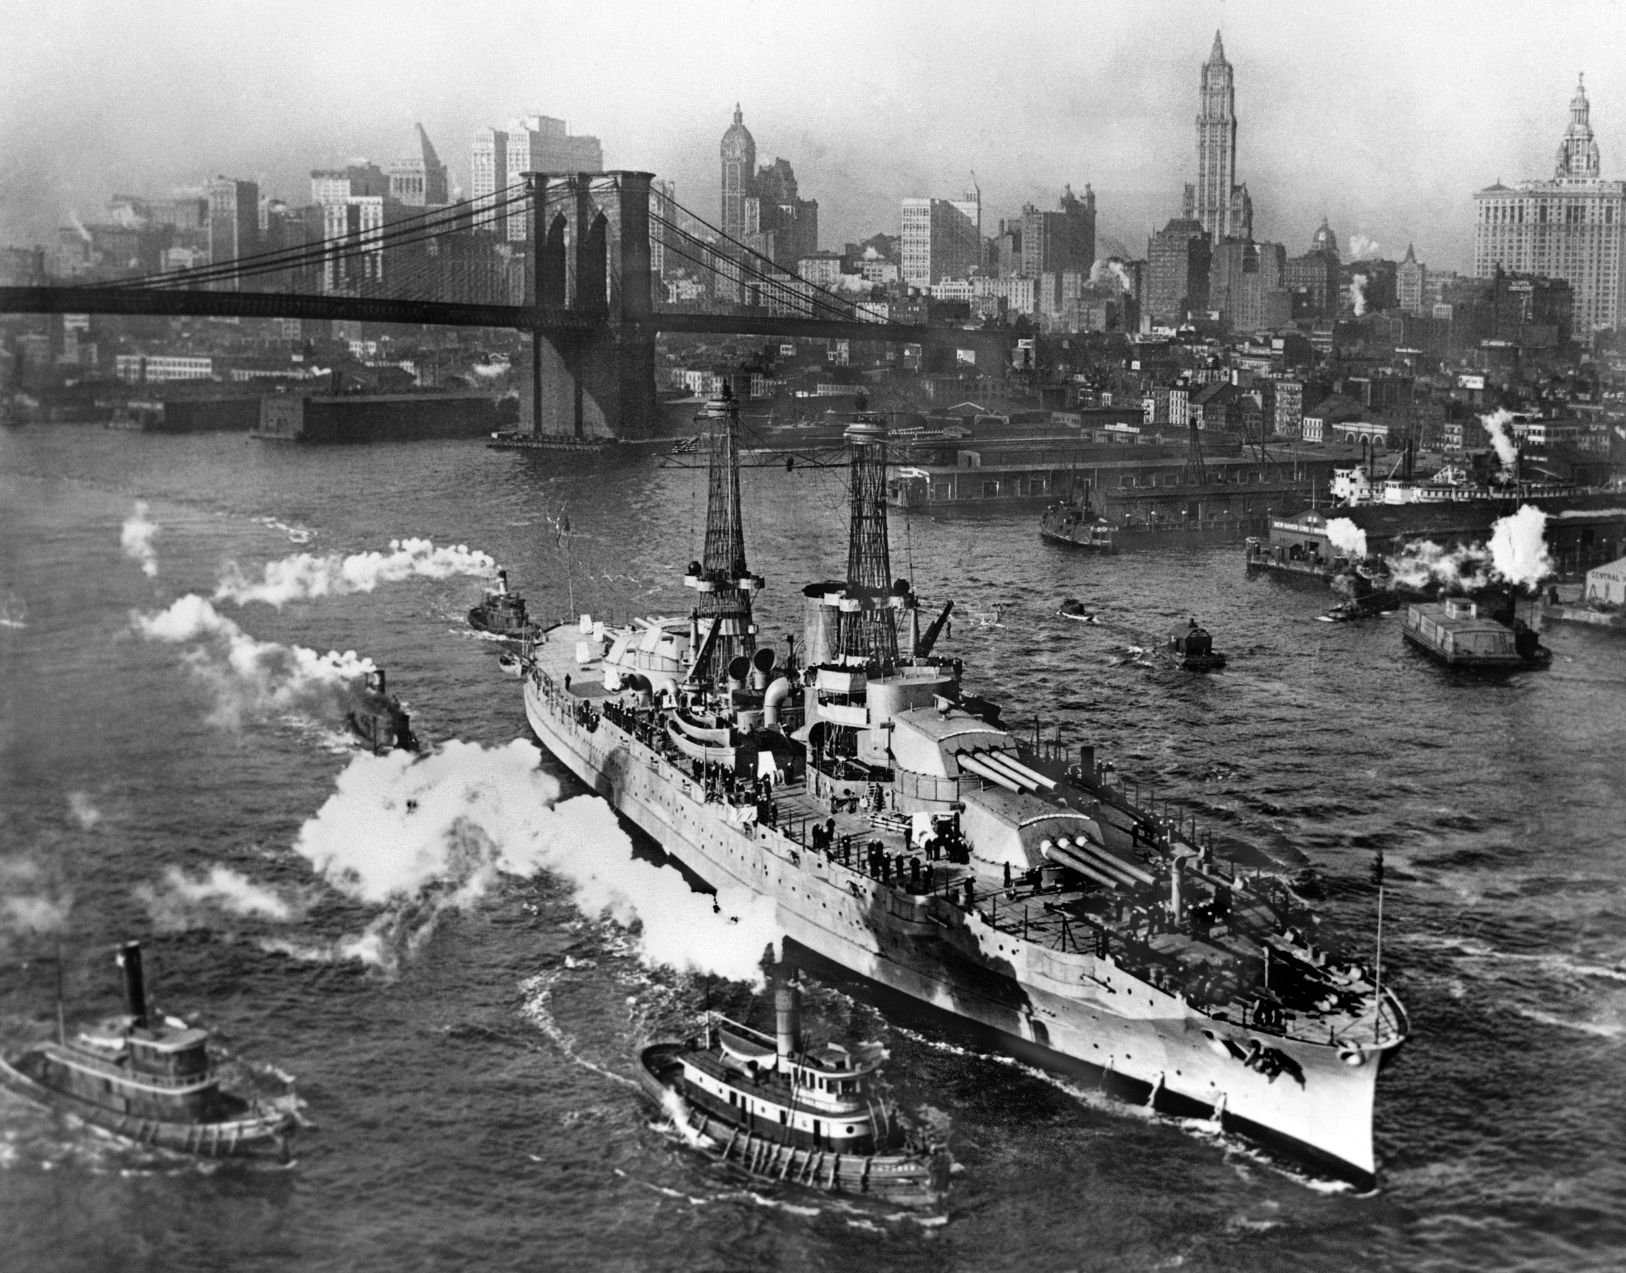 Rarely seen photos of the USS Arizona, sunk Dec. 7, 1941, in Pearl